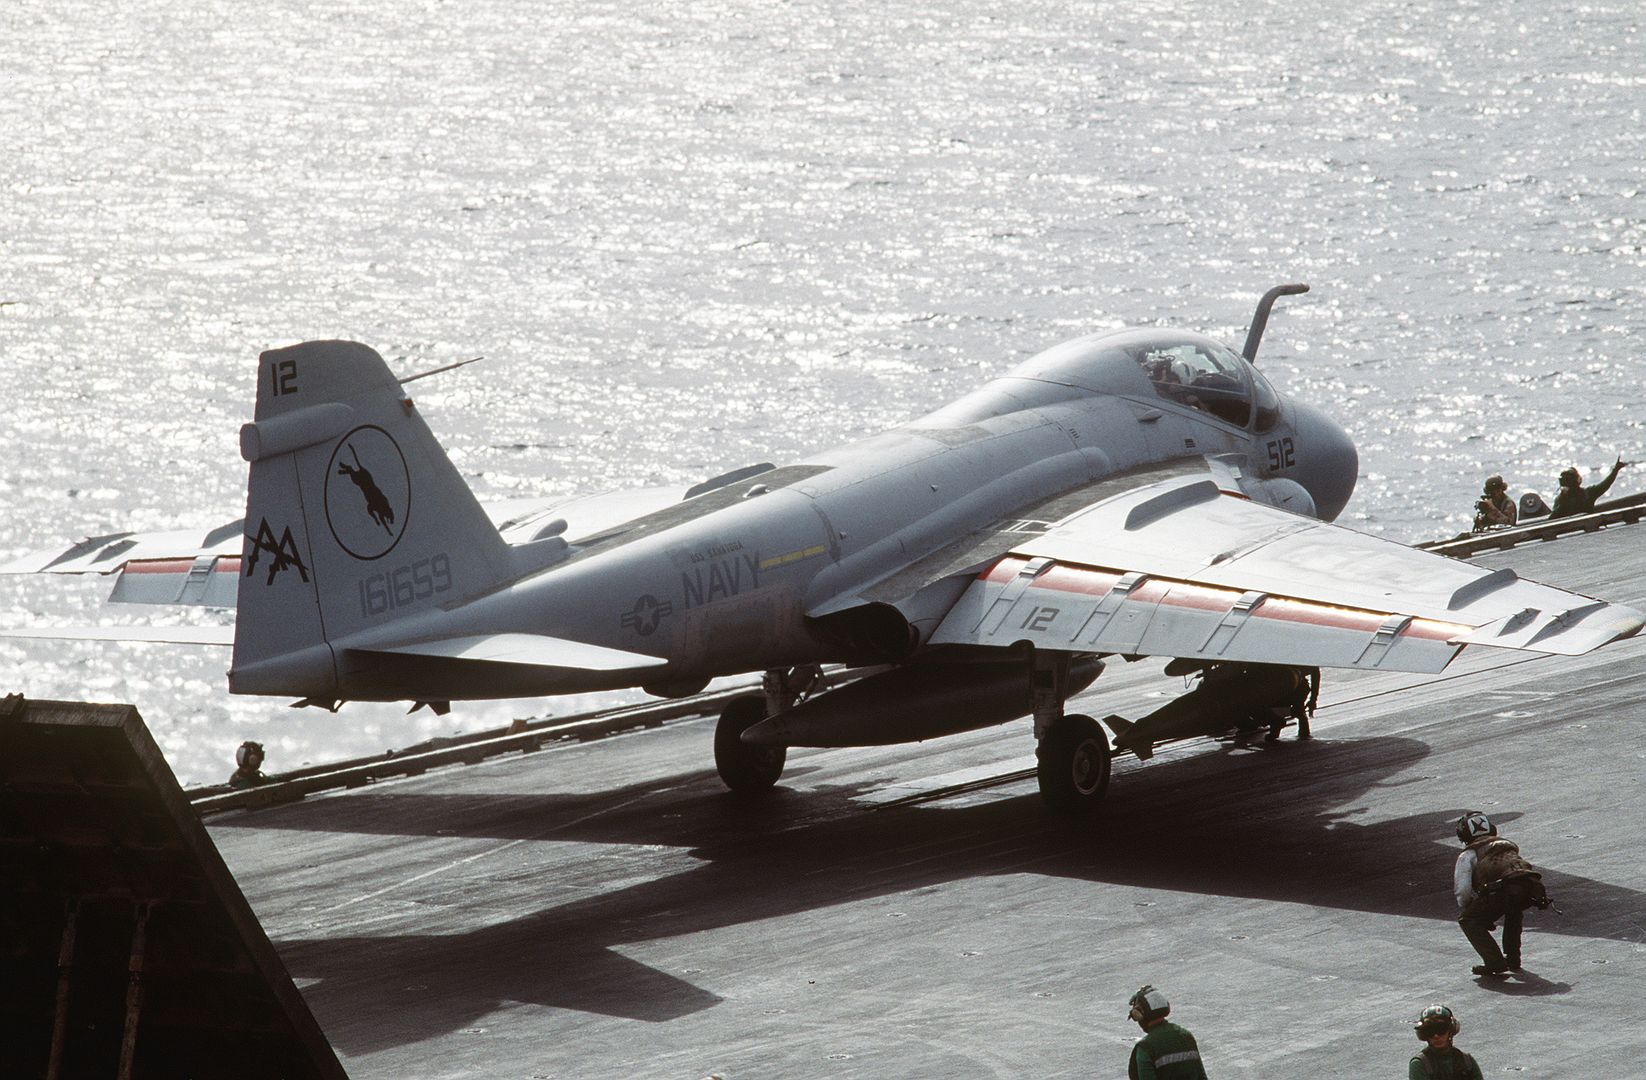 An Attack Squadron 35 A 6E Intruder Aircraft Receives A Final Check Before Launch On The Flight Deck Of The Aircraft Carrier USS SARATOGA